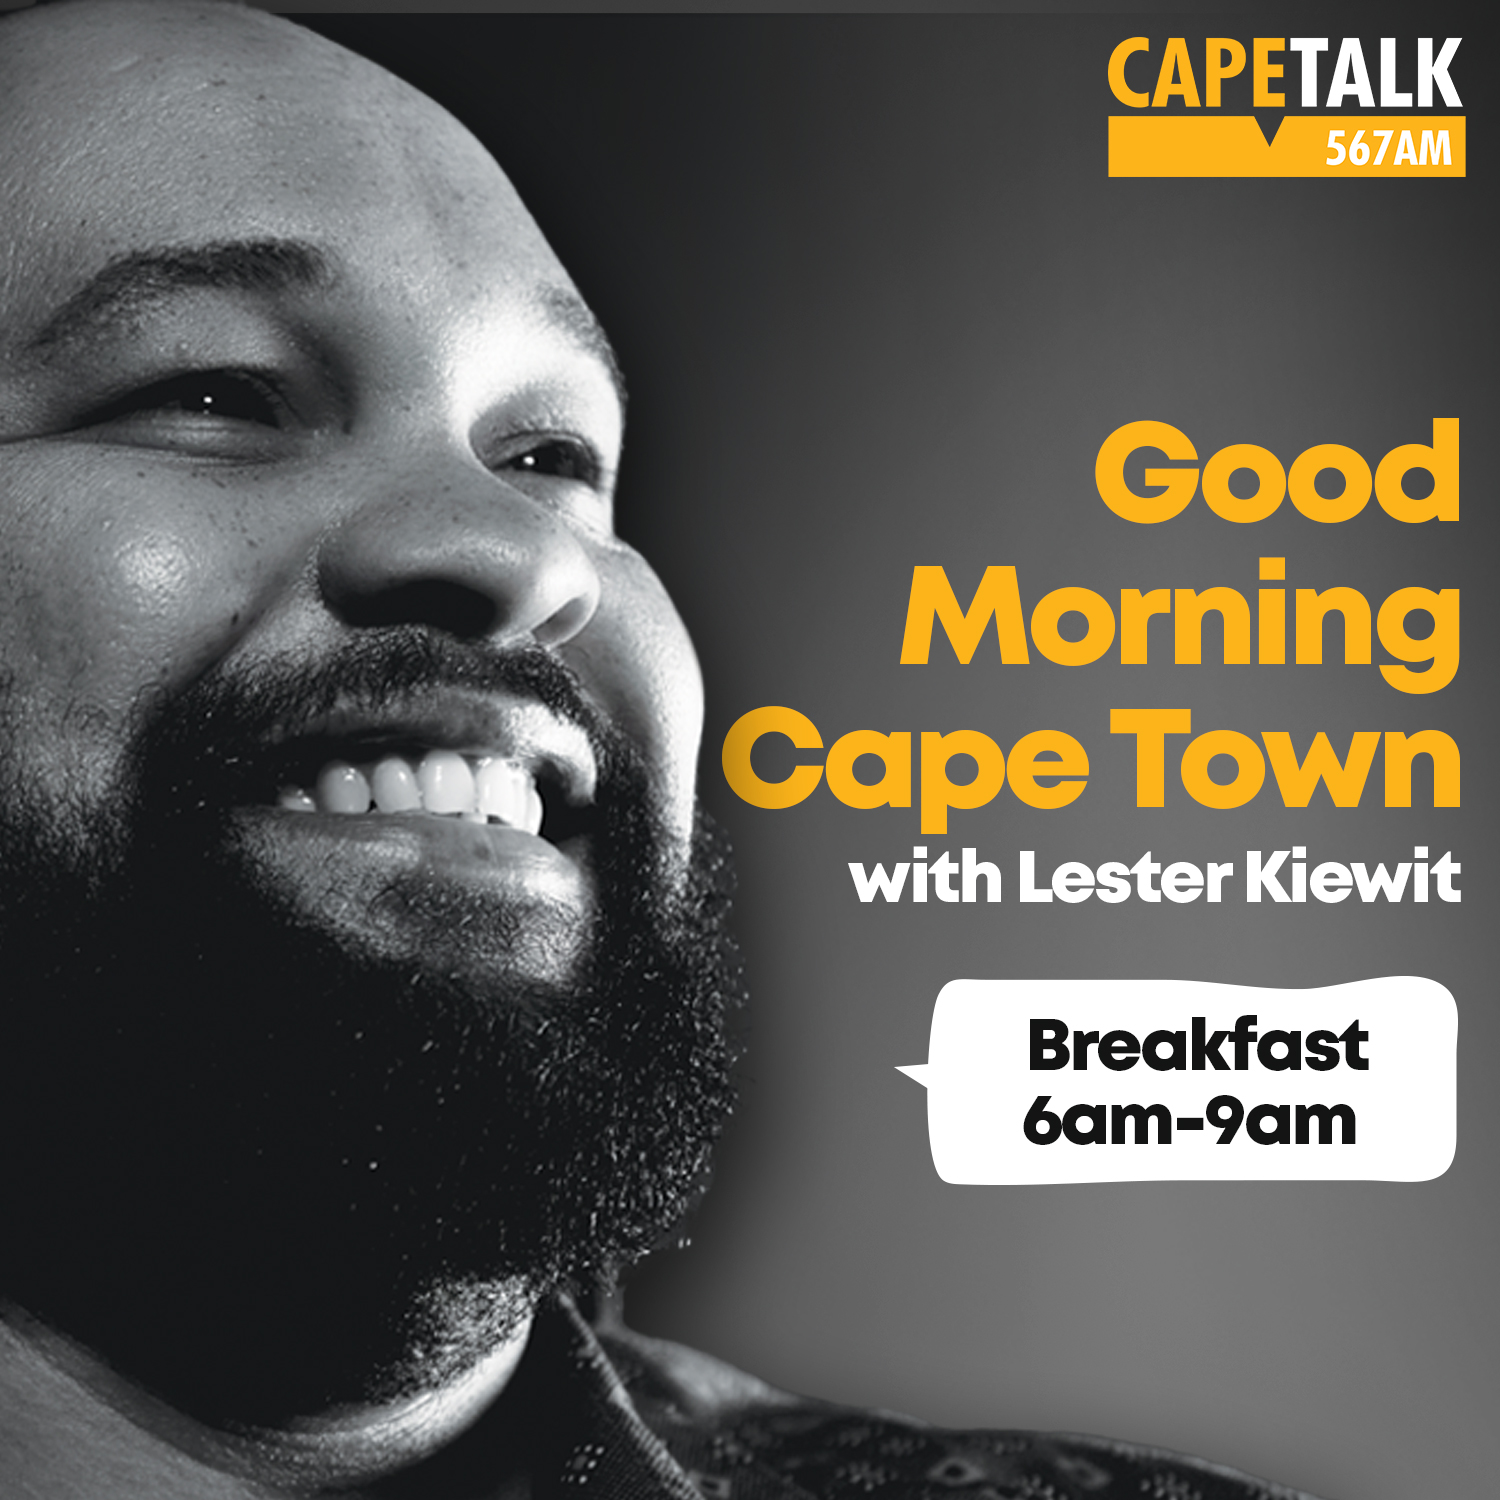 CapeTalk caller outraged that a male employee was sent to assist her with a bra fitting